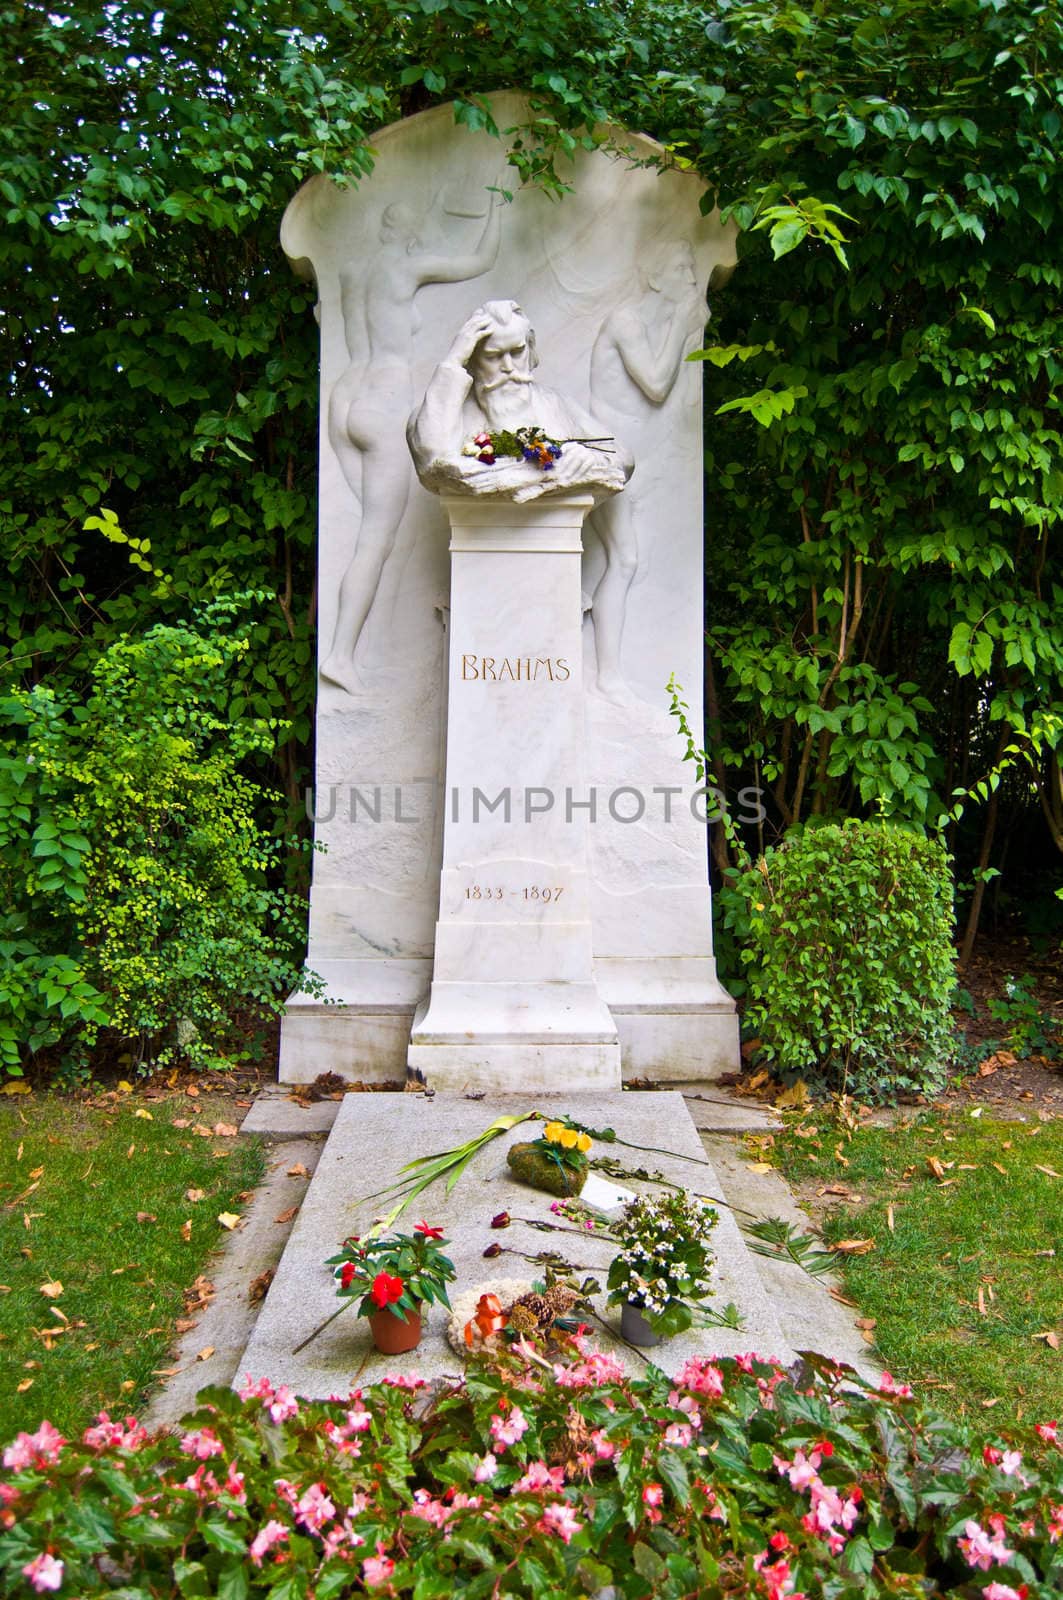 Brahms' grave on the viennese central cemetery